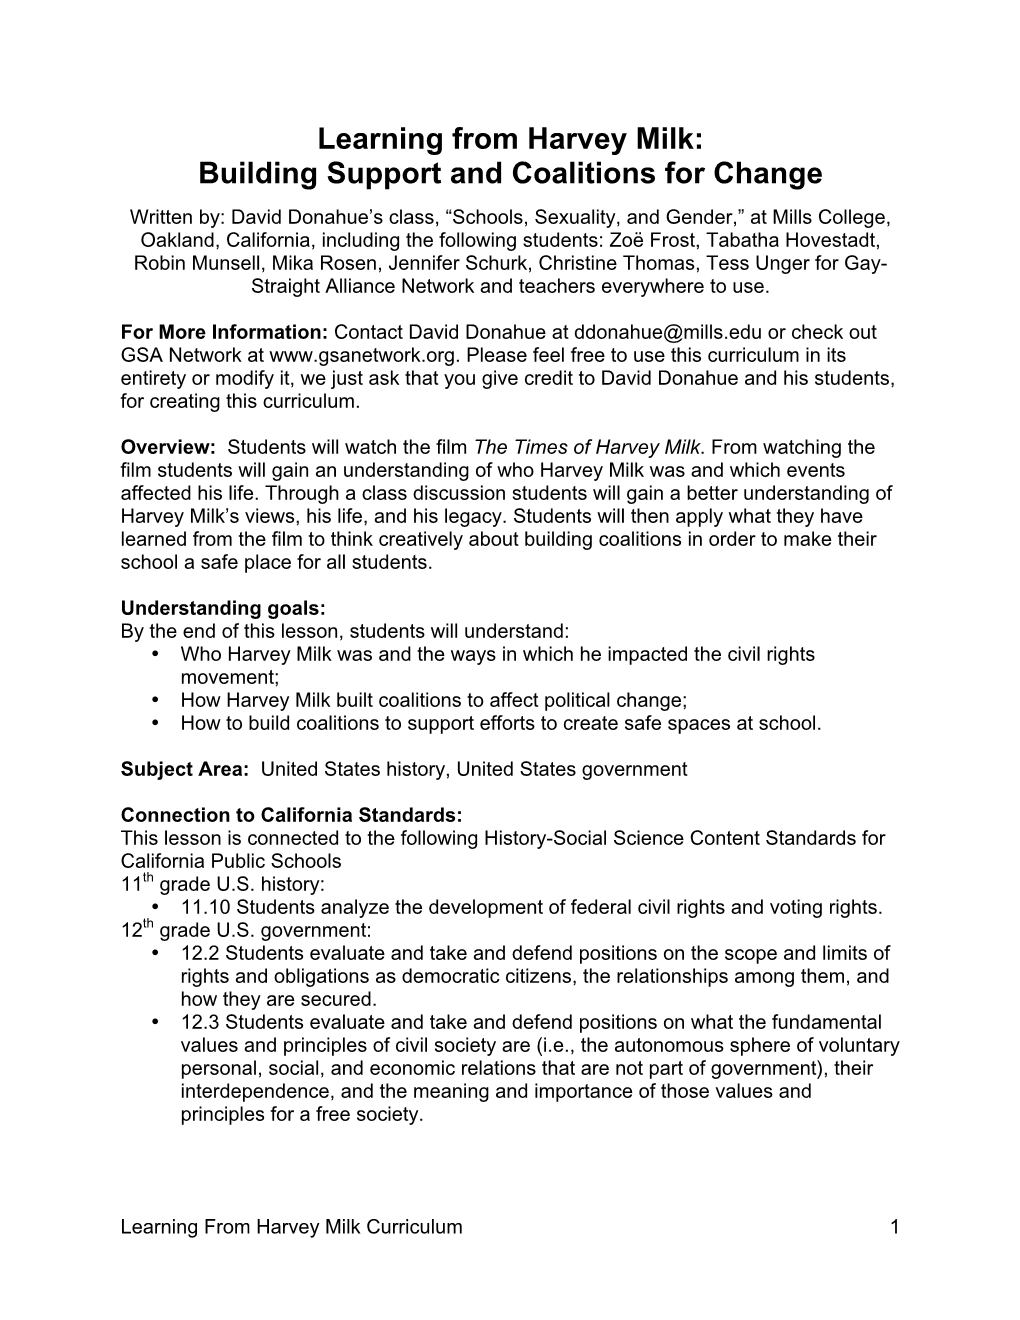 Learning from Harvey Milk: Building Support and Coalitions for Change